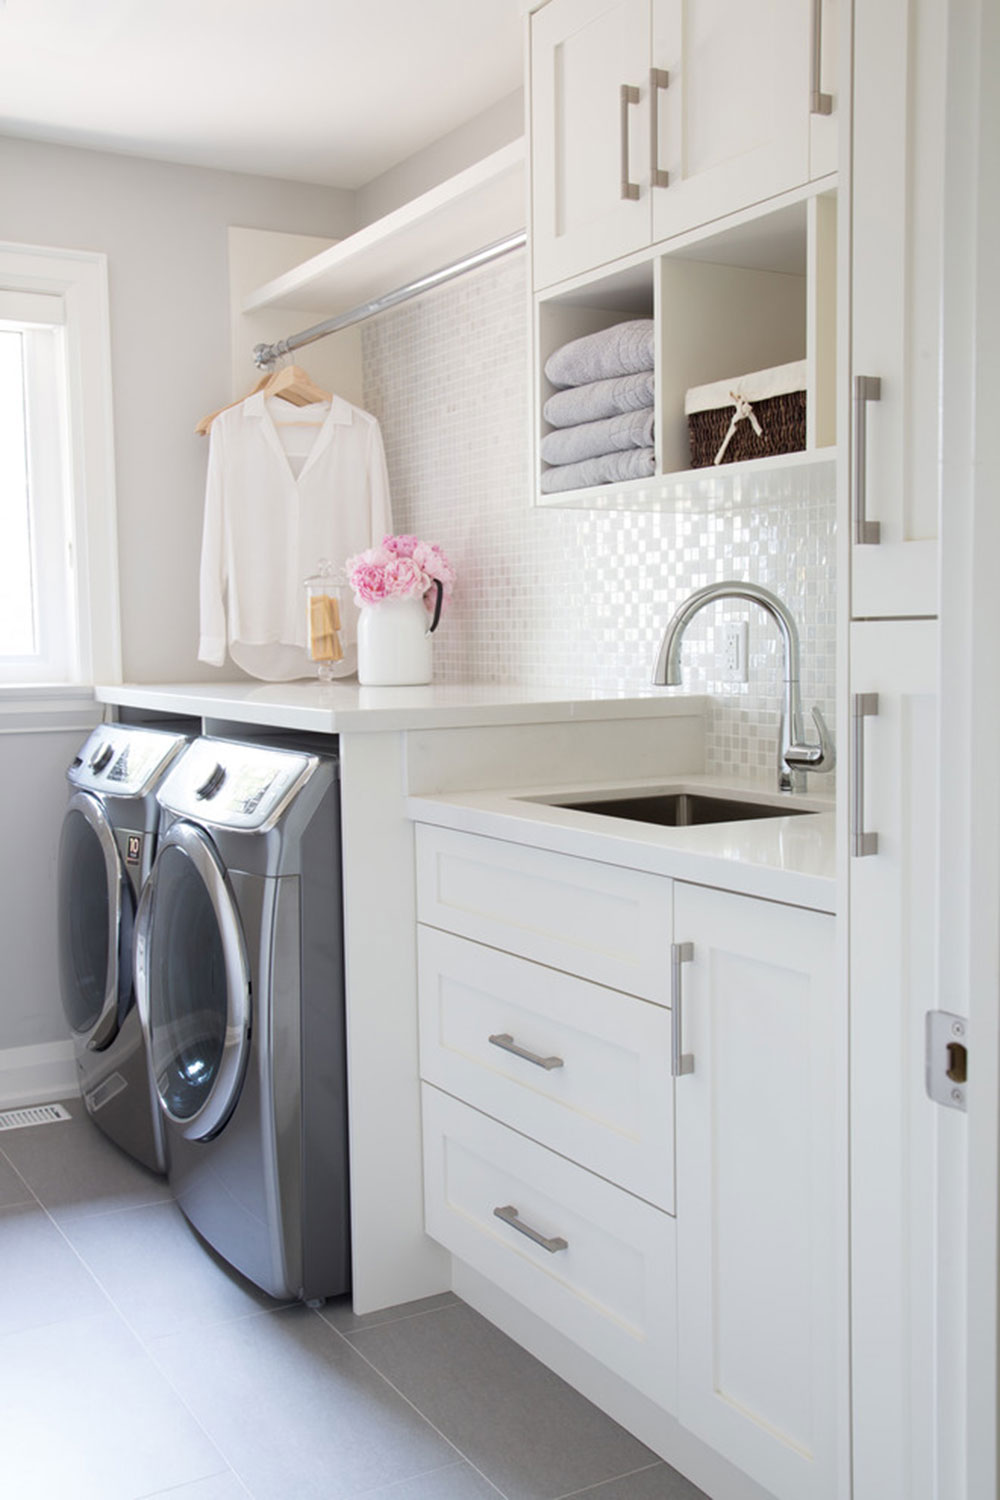 Courtsfield-Ave-by-barlow-reid-design How to organize a laundry room? Some storage ideas